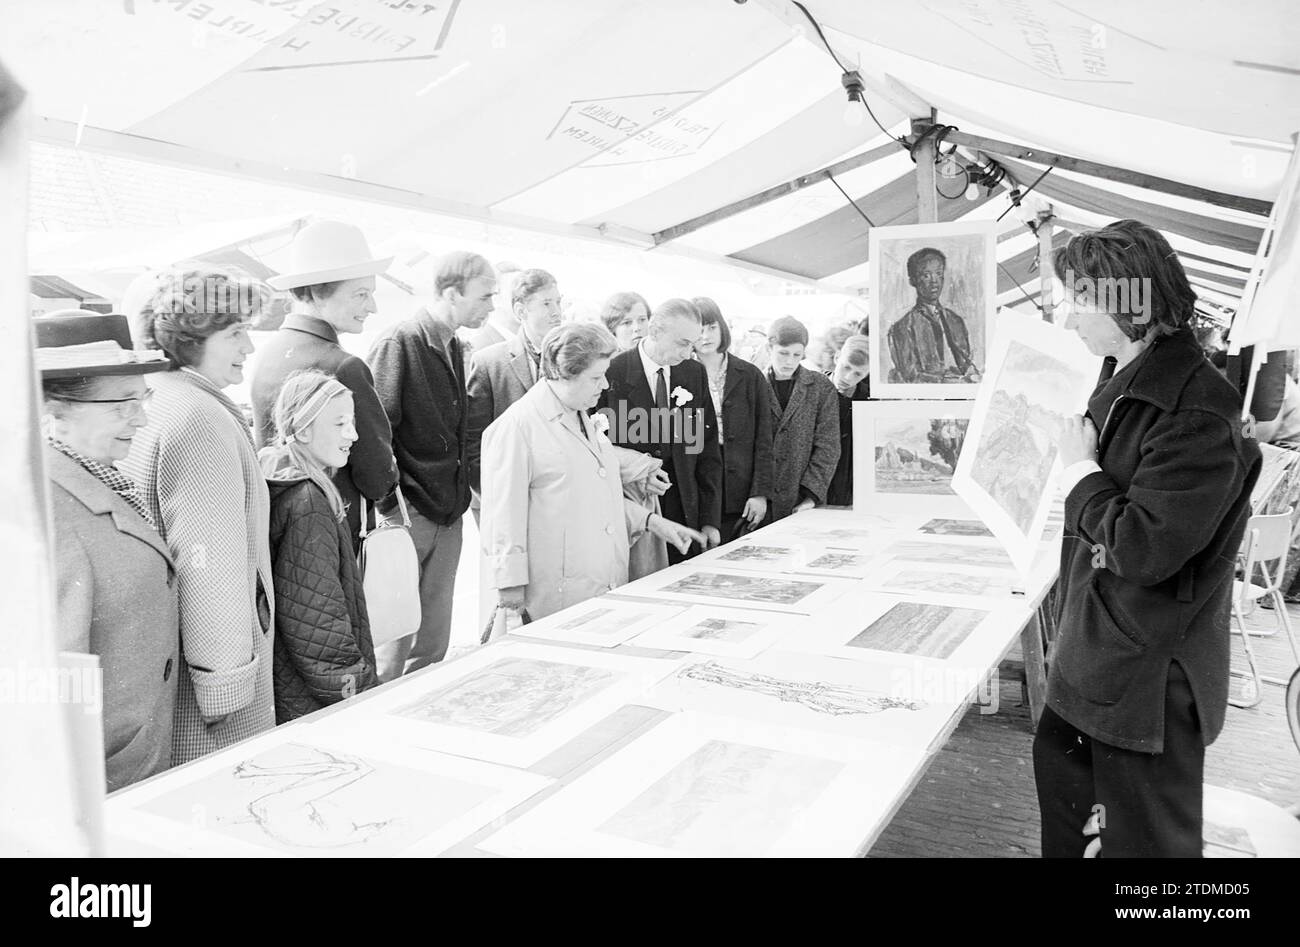 Art market, Market, 11-06-1965, Whizgle News from the Past, Tailored for the Future. Explore historical narratives, Dutch The Netherlands agency image with a modern perspective, bridging the gap between yesterday's events and tomorrow's insights. A timeless journey shaping the stories that shape our future Stock Photo